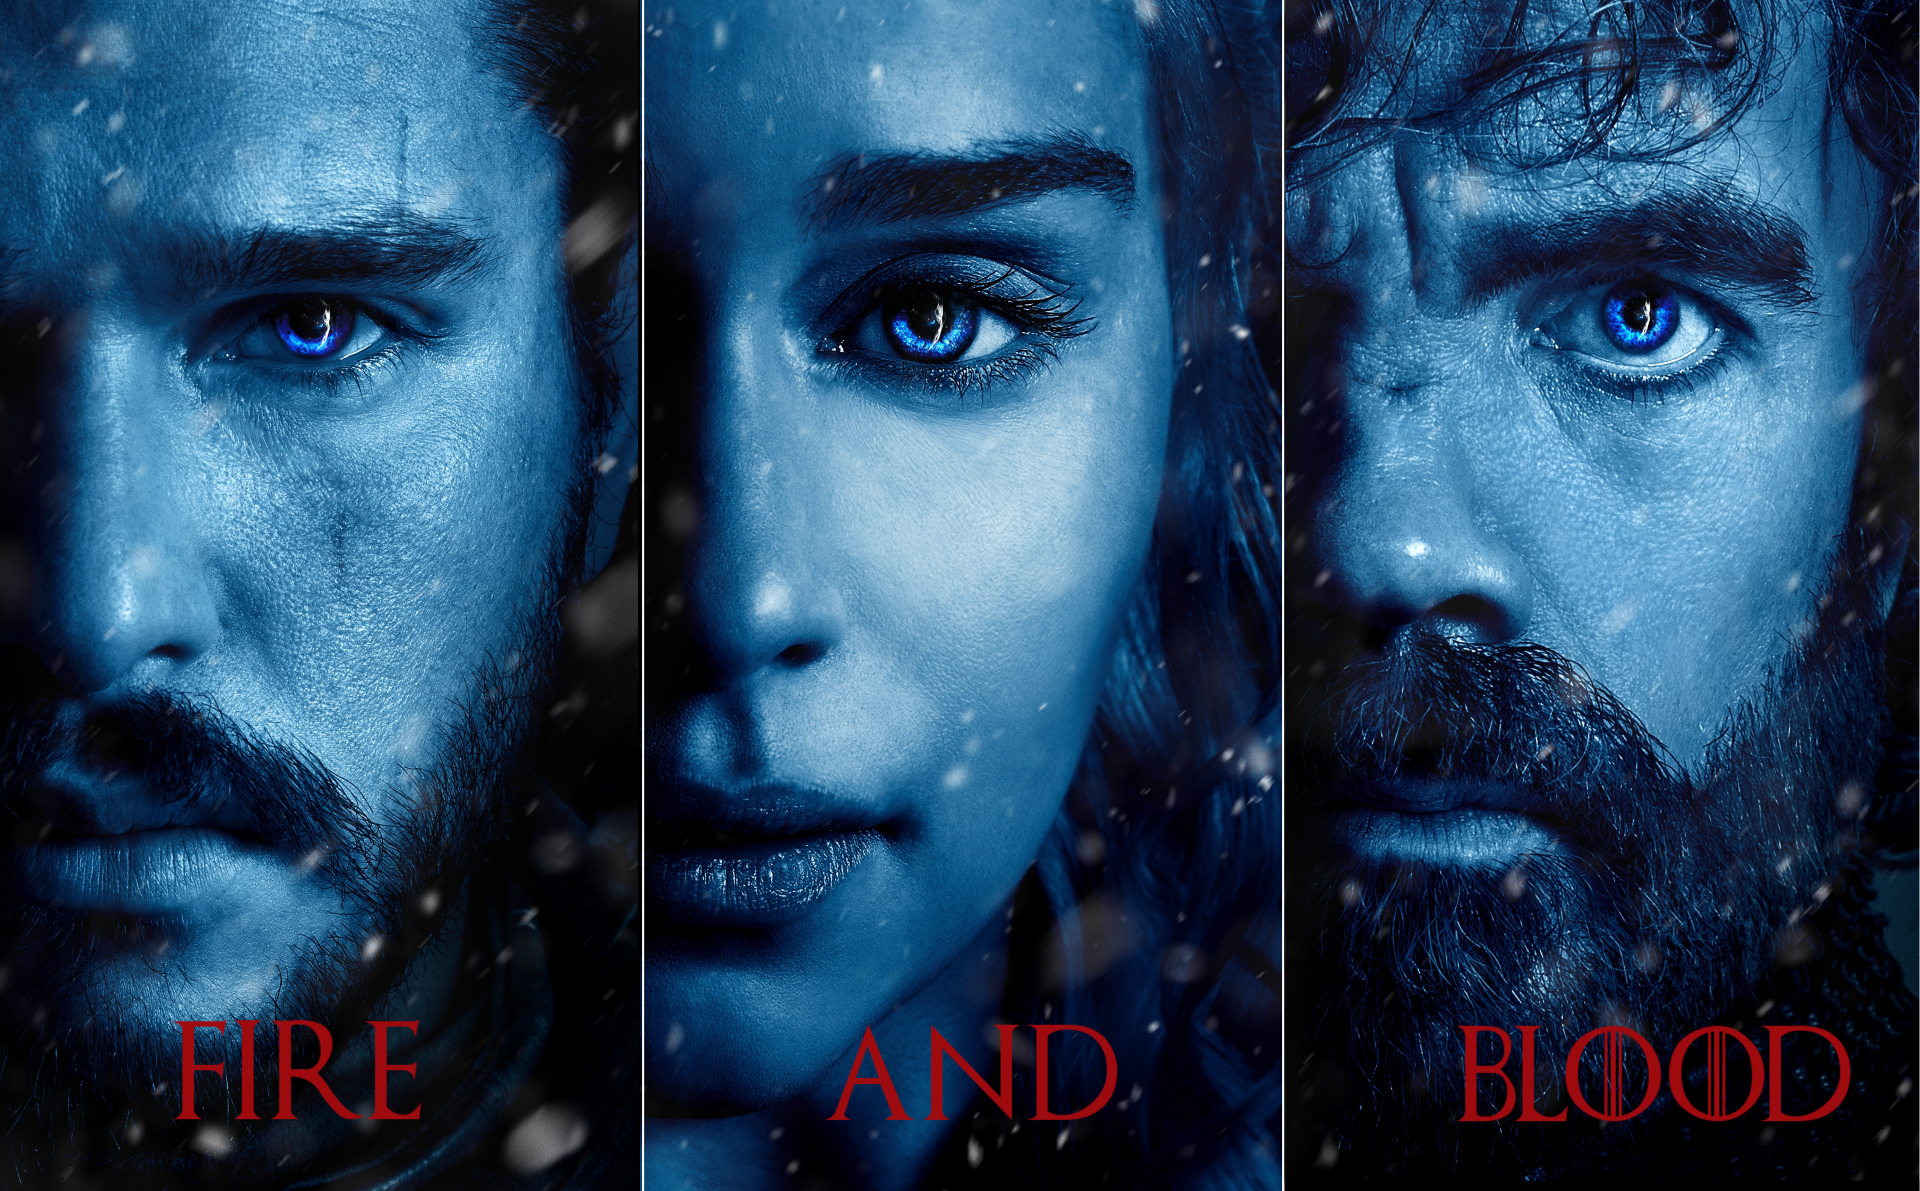 Game Of Thrones 4k Ultra HD Wallpaper | Background Image | 7416x4600